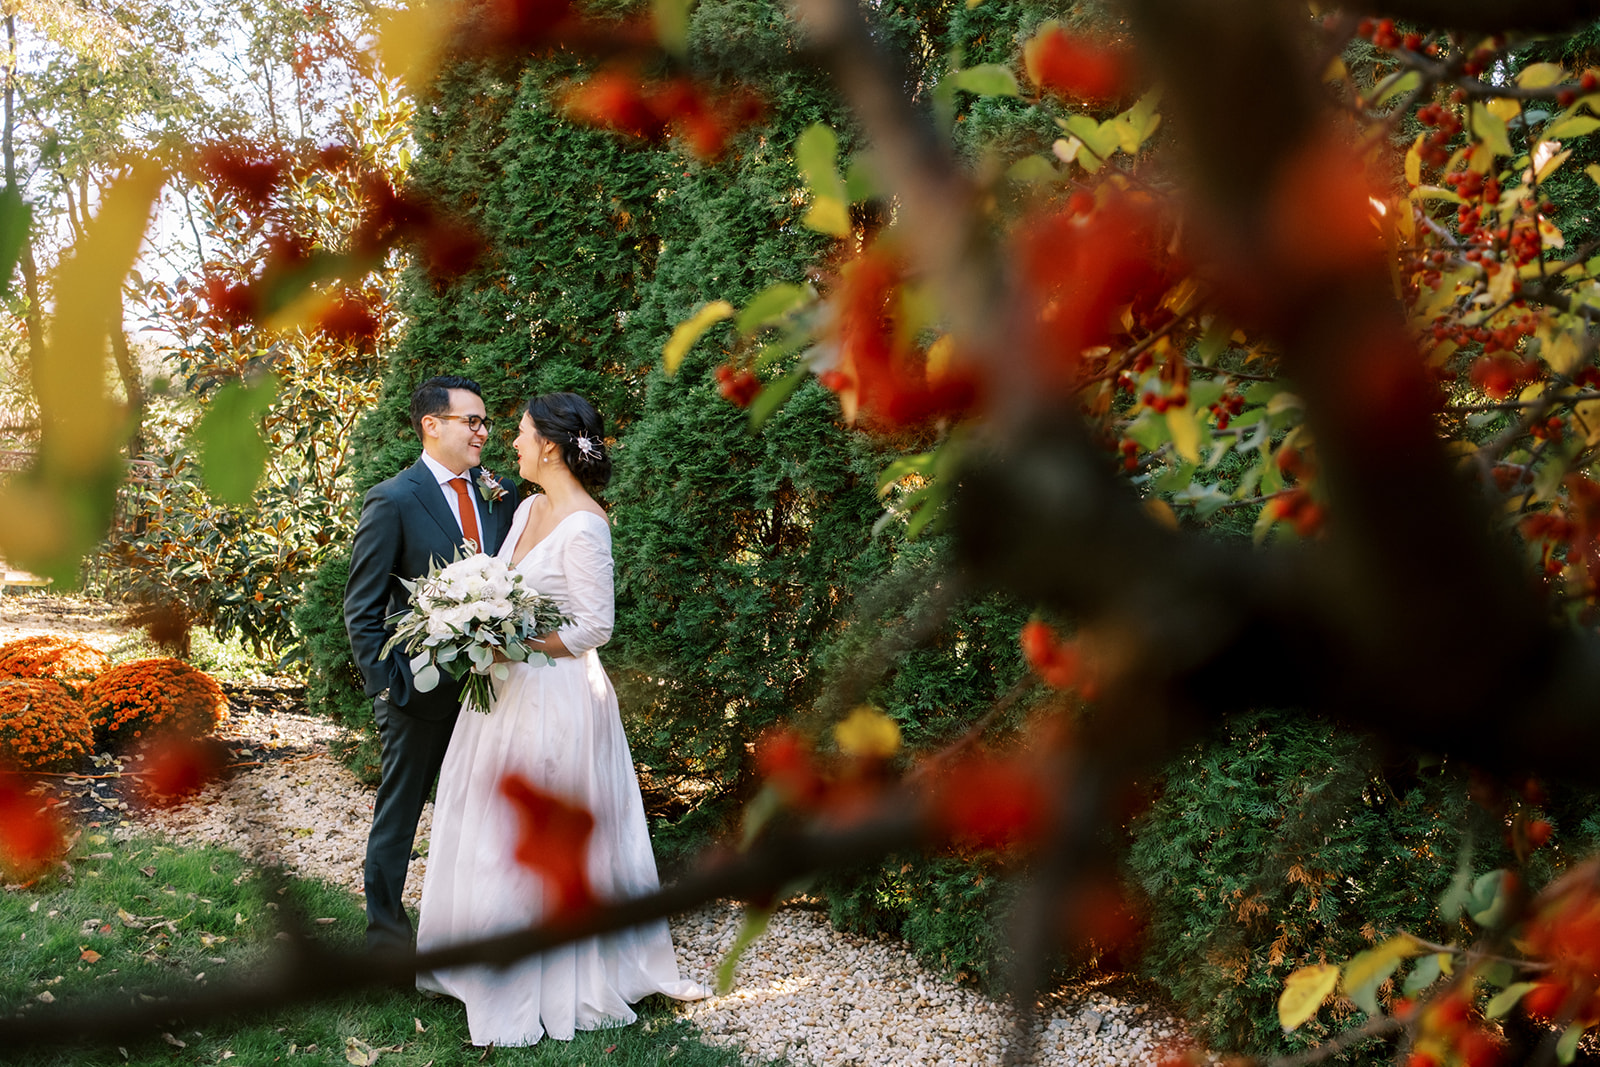 Bride and groom first look in the garden of backyard wedding in Maryland private residence